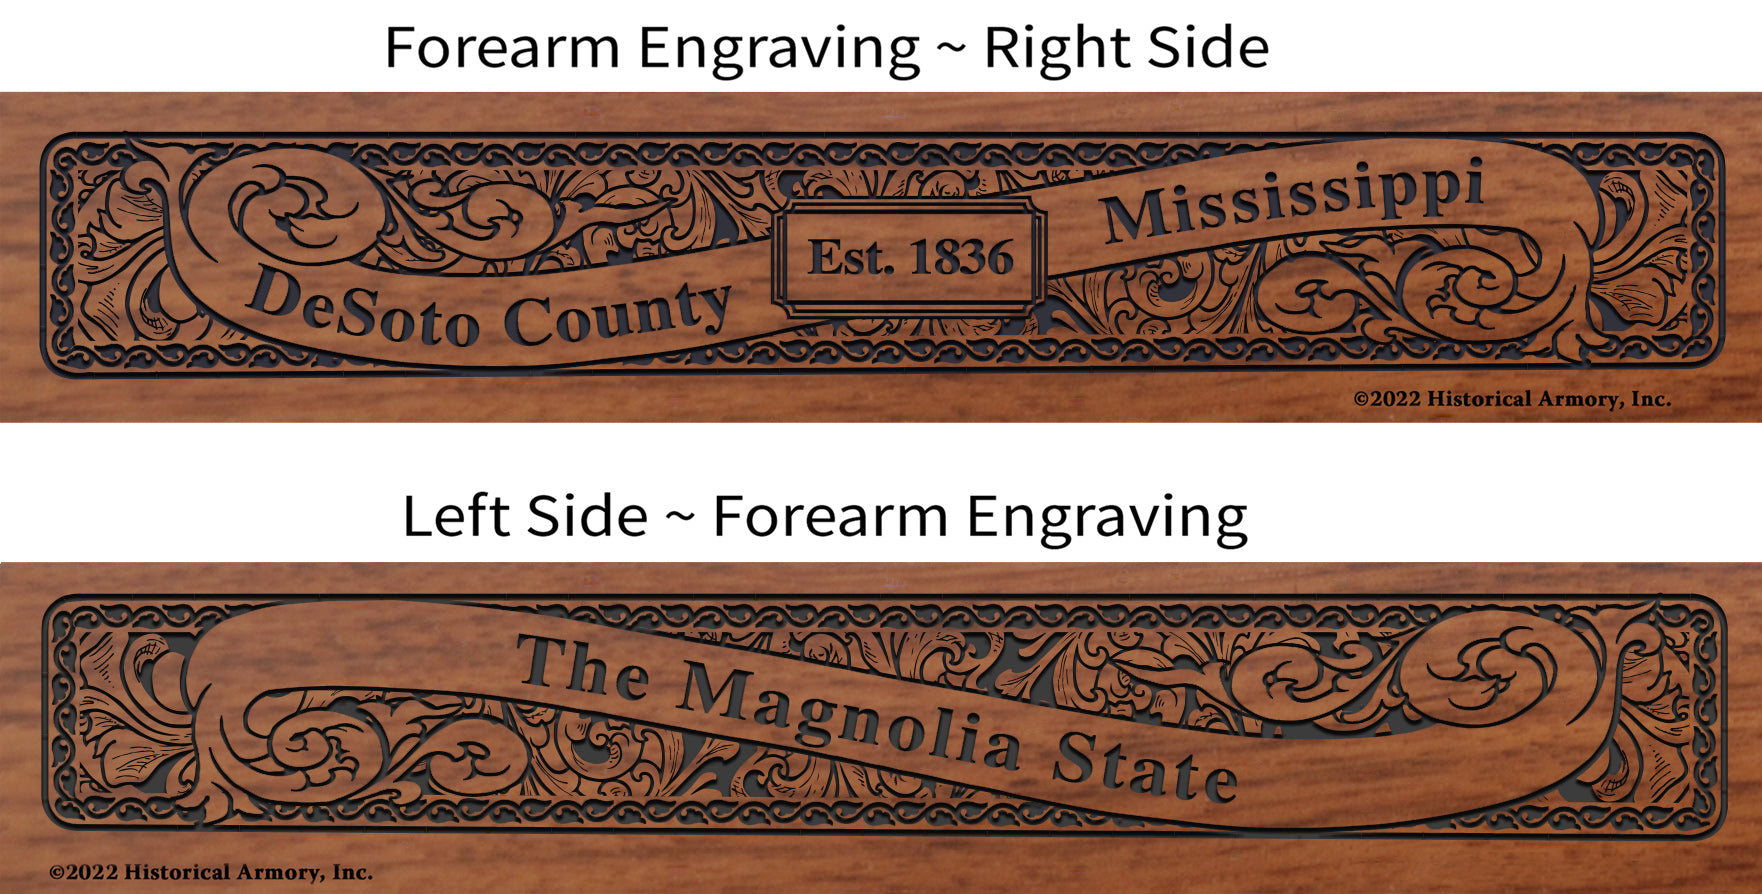 Desoto County Mississippi Engraved Rifle Forearm